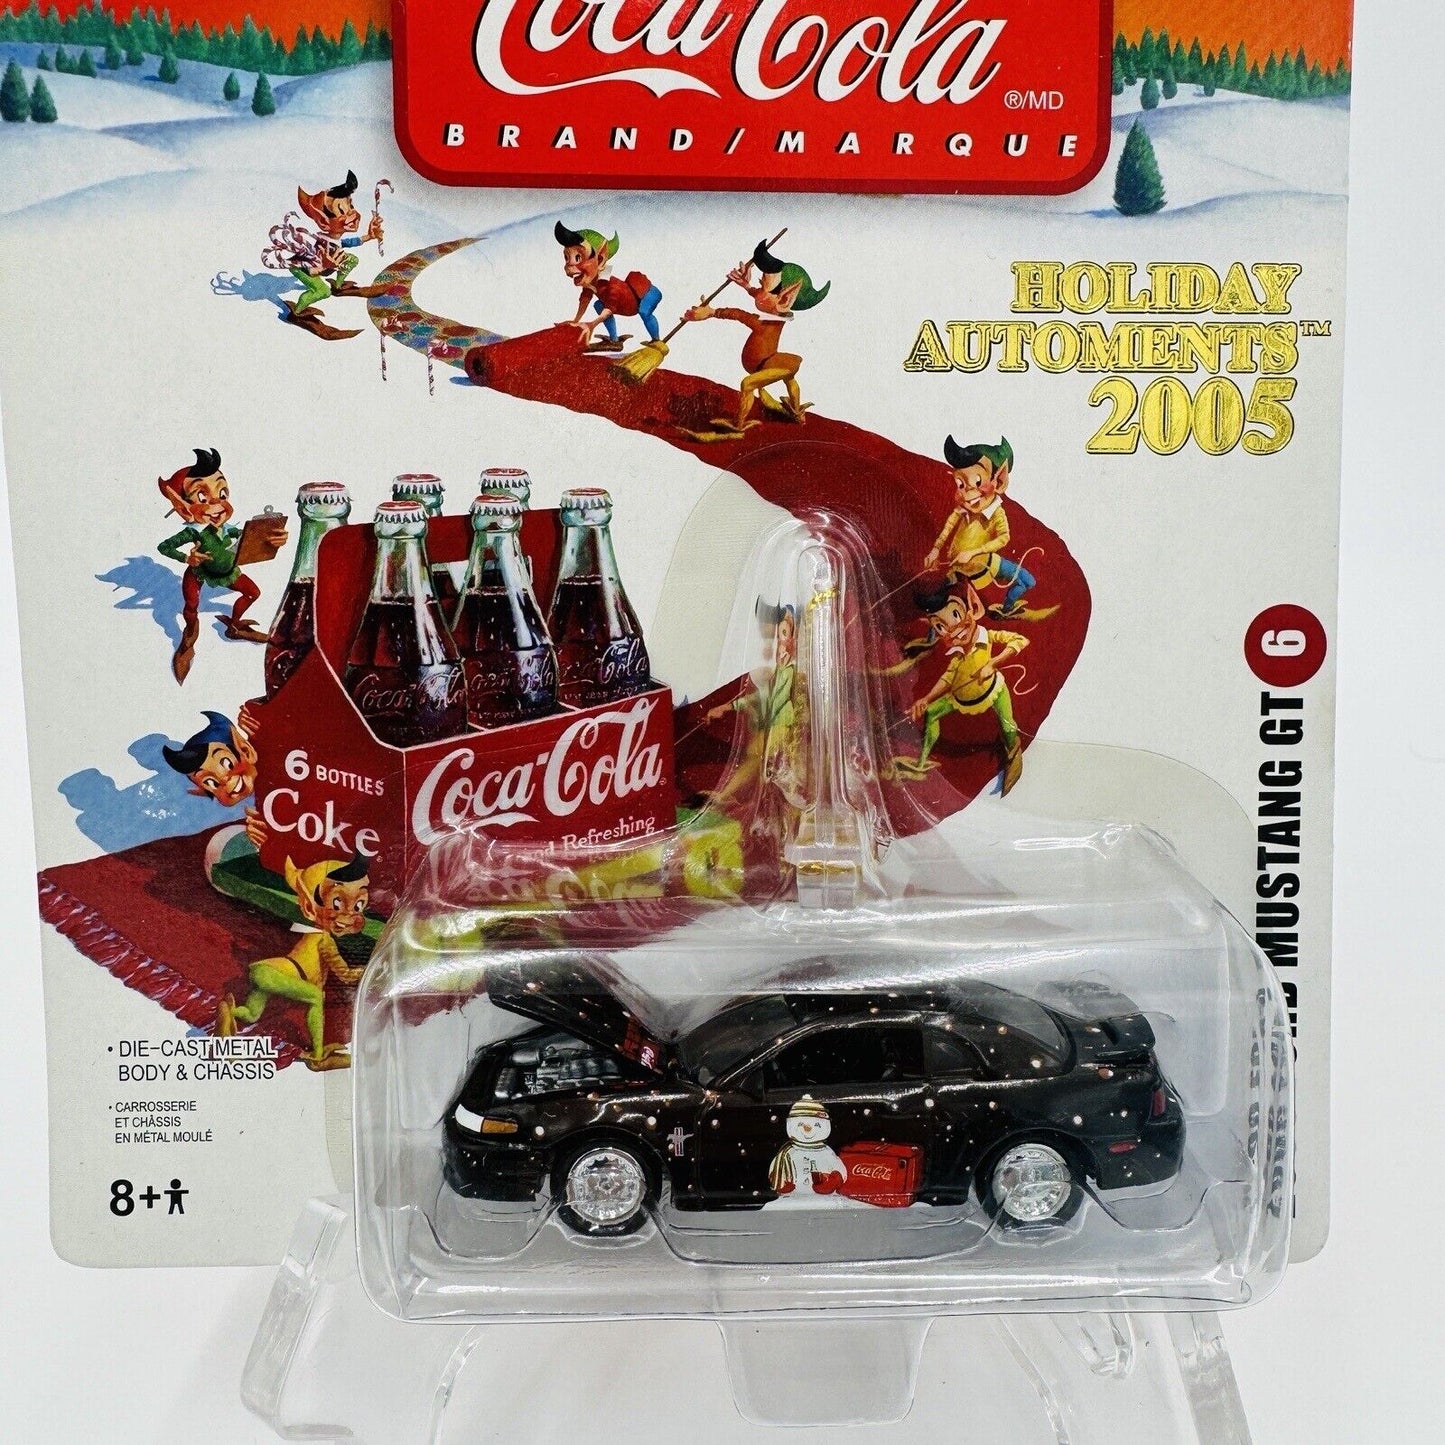 2005 Johnny Lightning Coca Cola Holiday Ornaments #6 2000 Ford Mustang GT